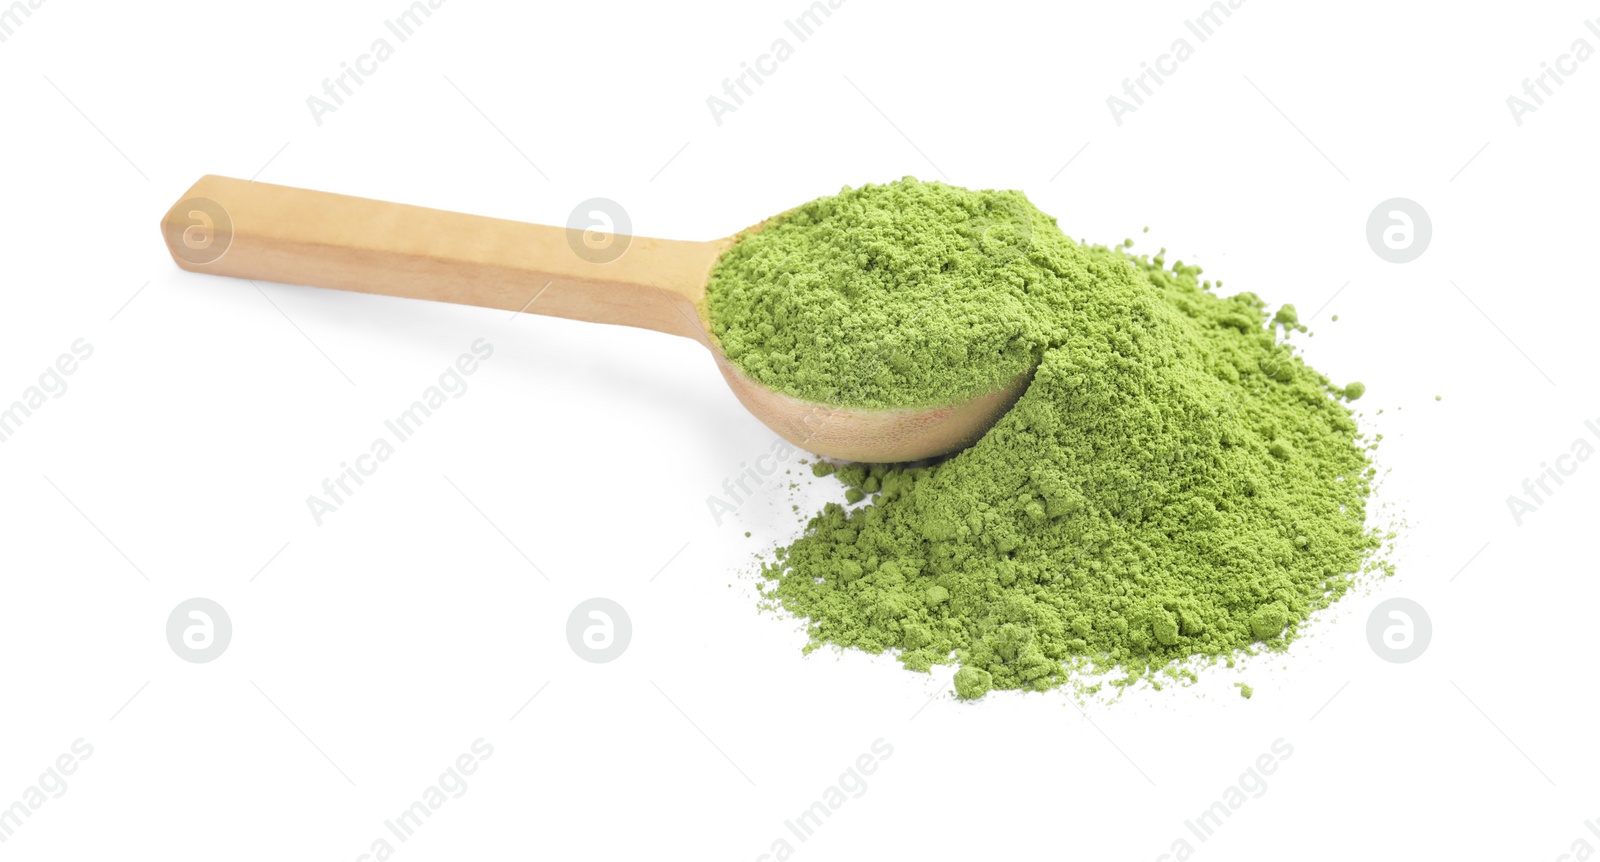 Photo of Wooden spoon with green matcha powder isolated on white